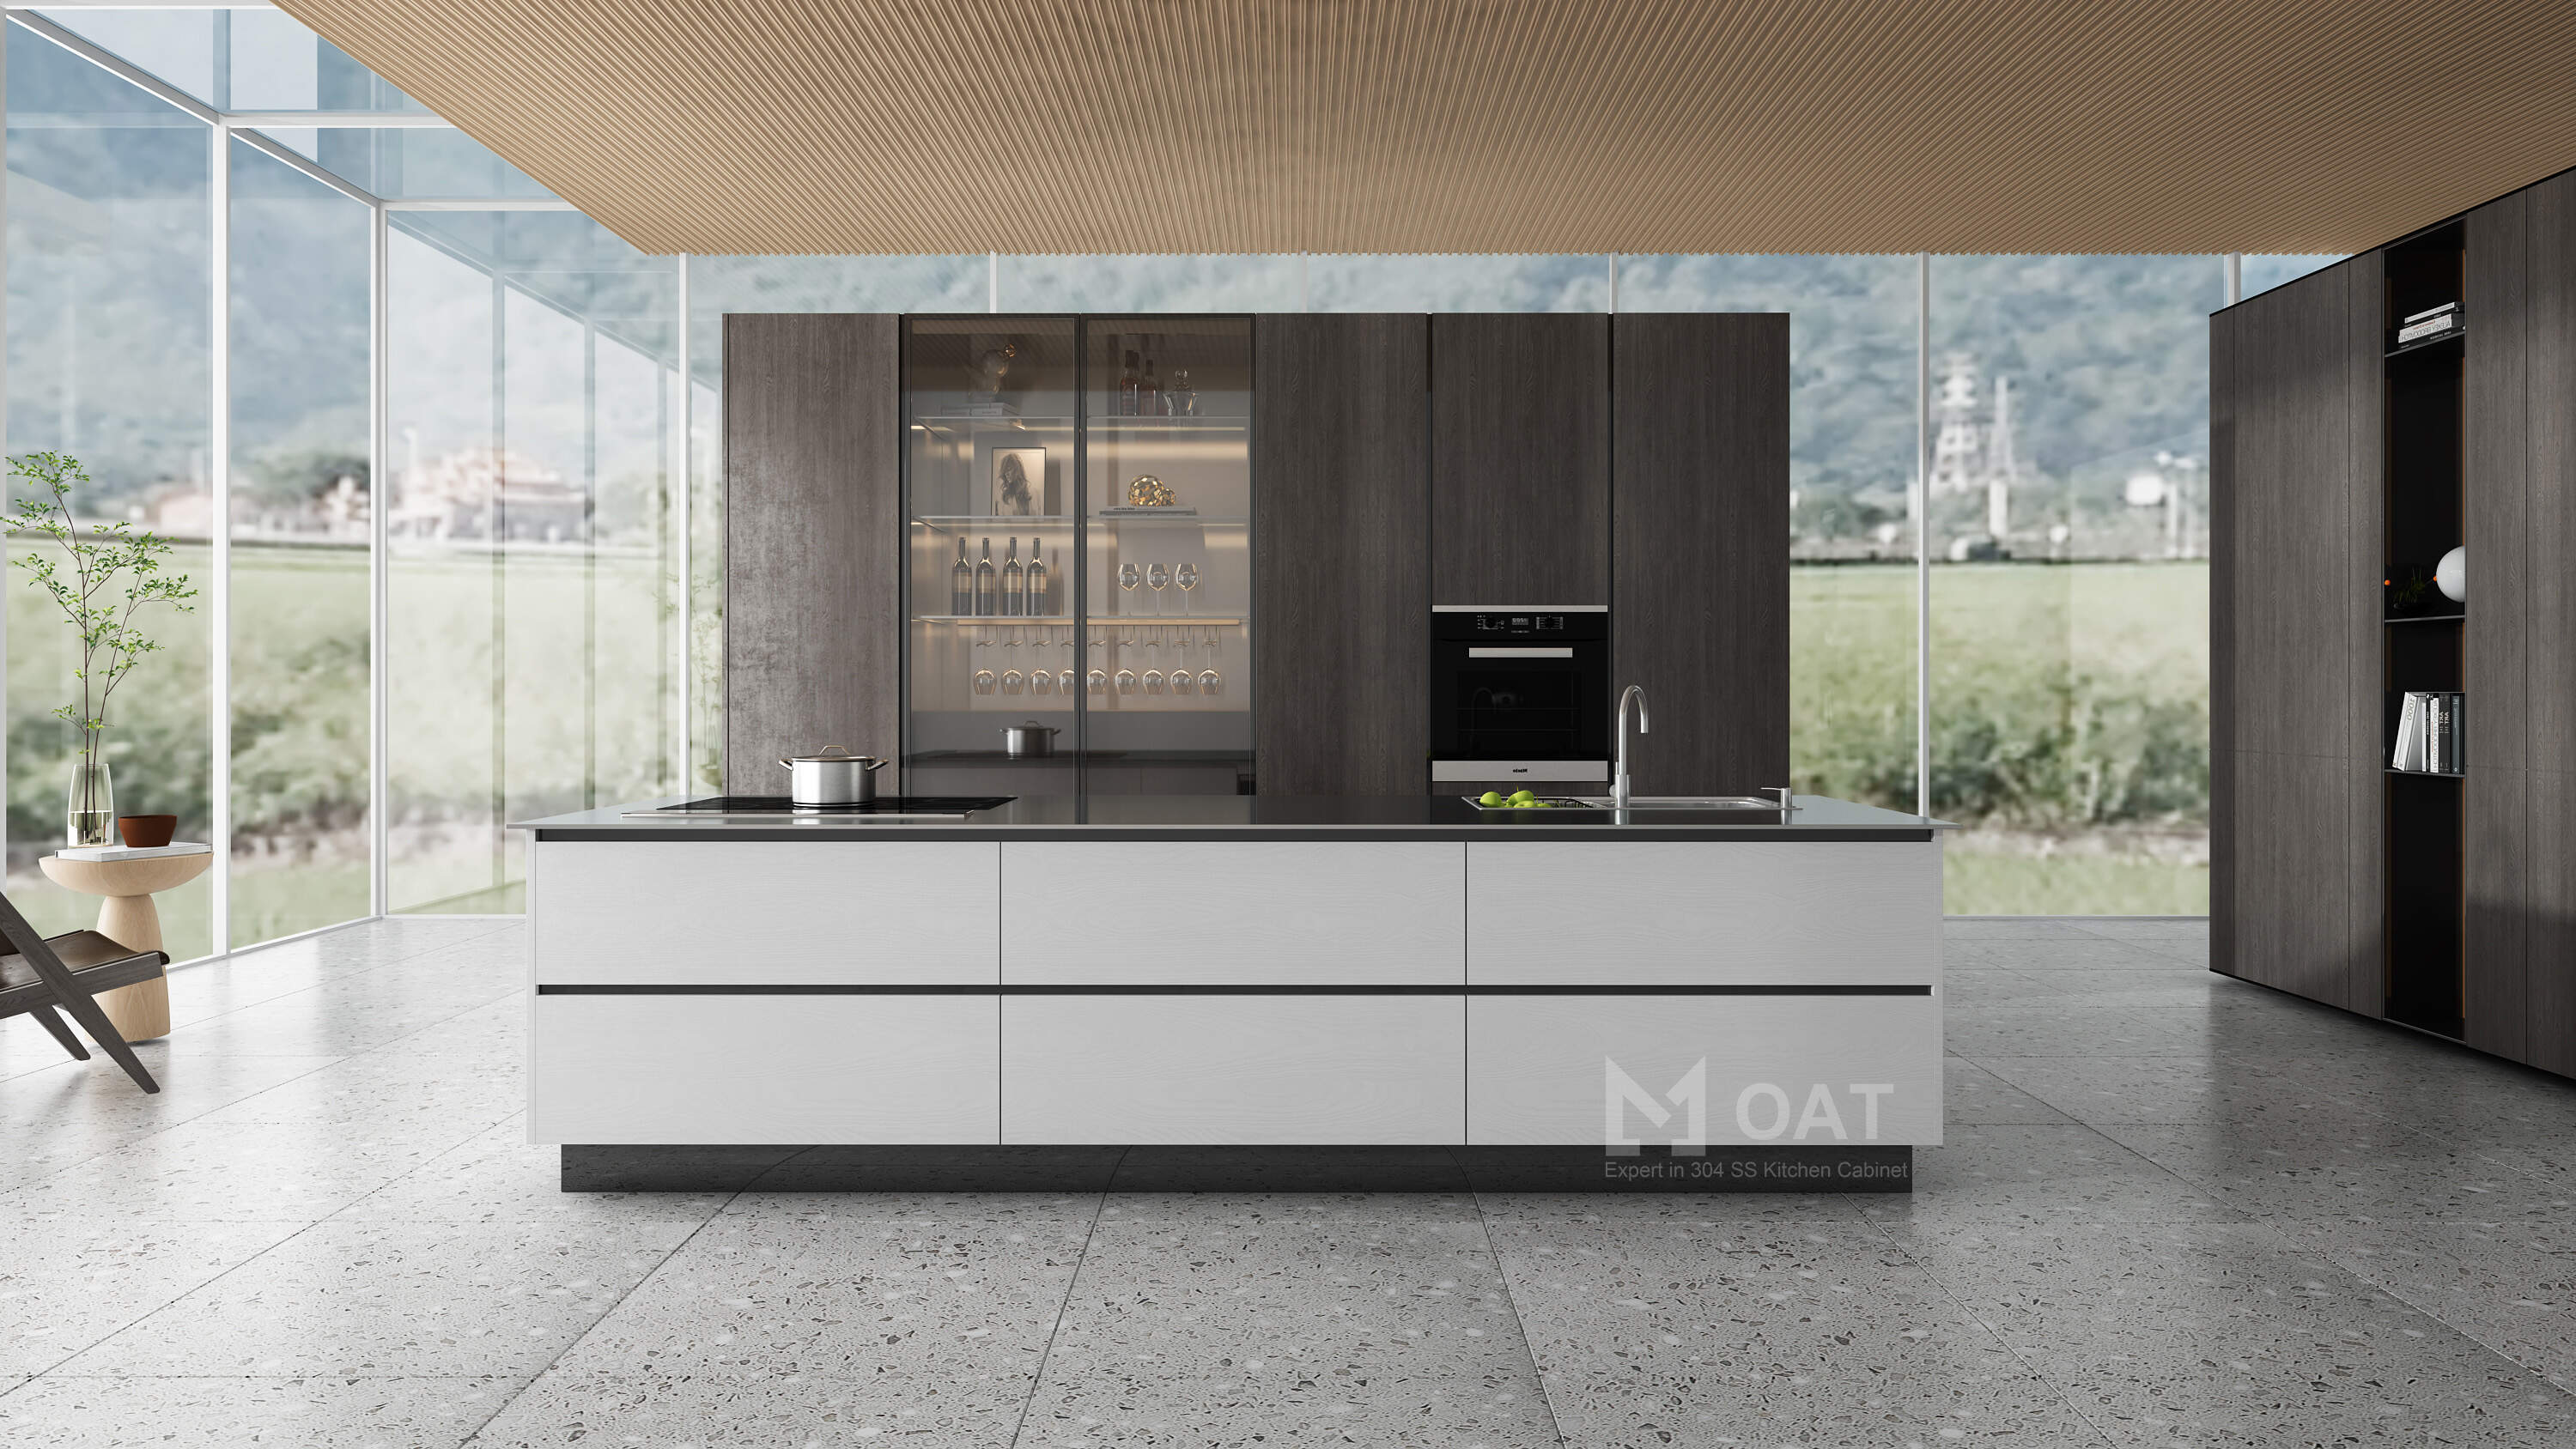 Stainless Steel Kitchen Are Definitely a Great Alternative